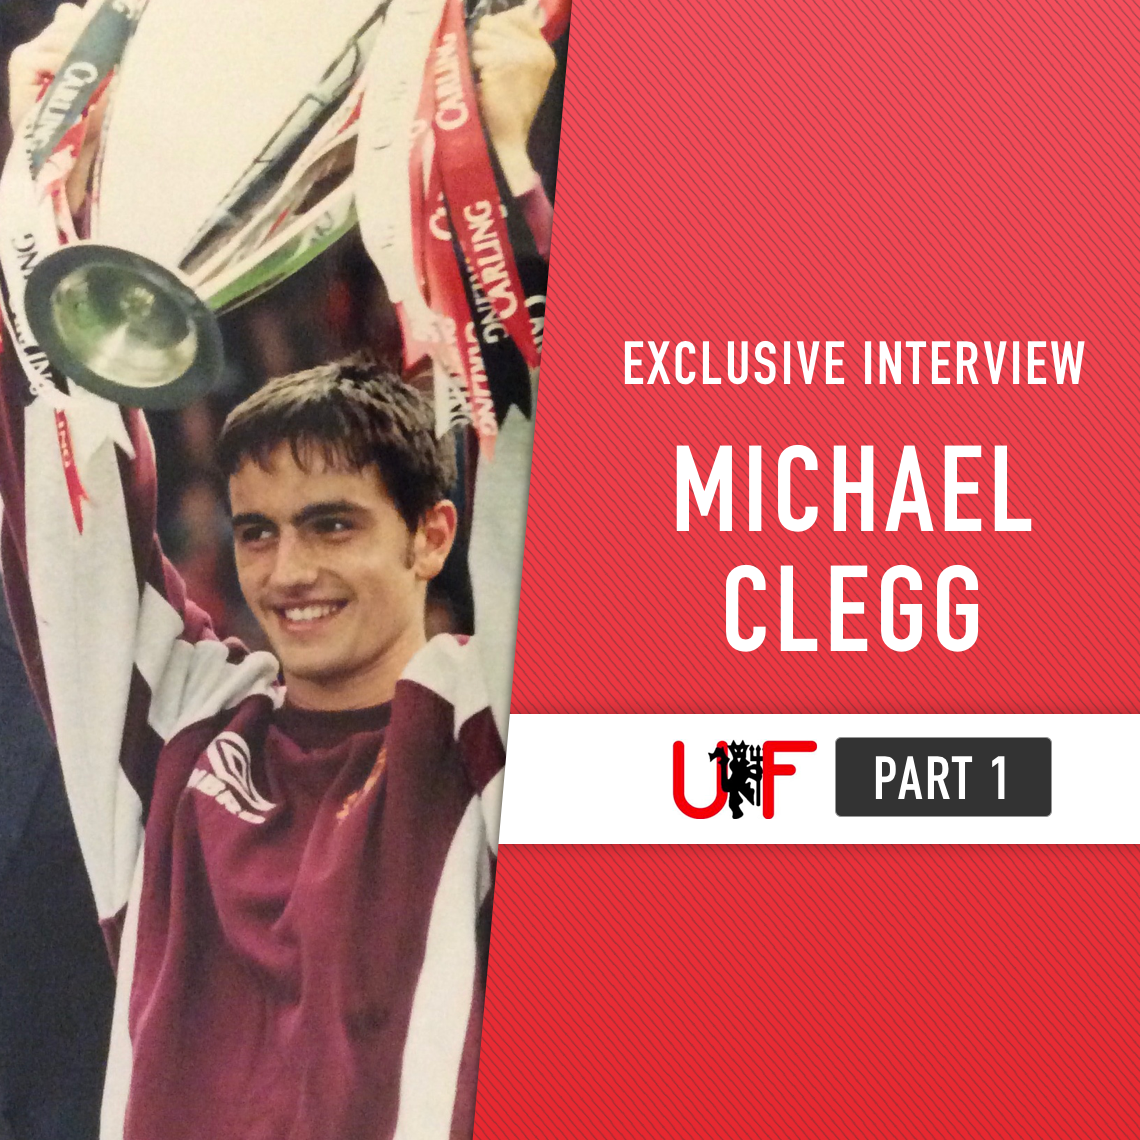 Exclusive: Michael Clegg's five most memorable Manchester United moments